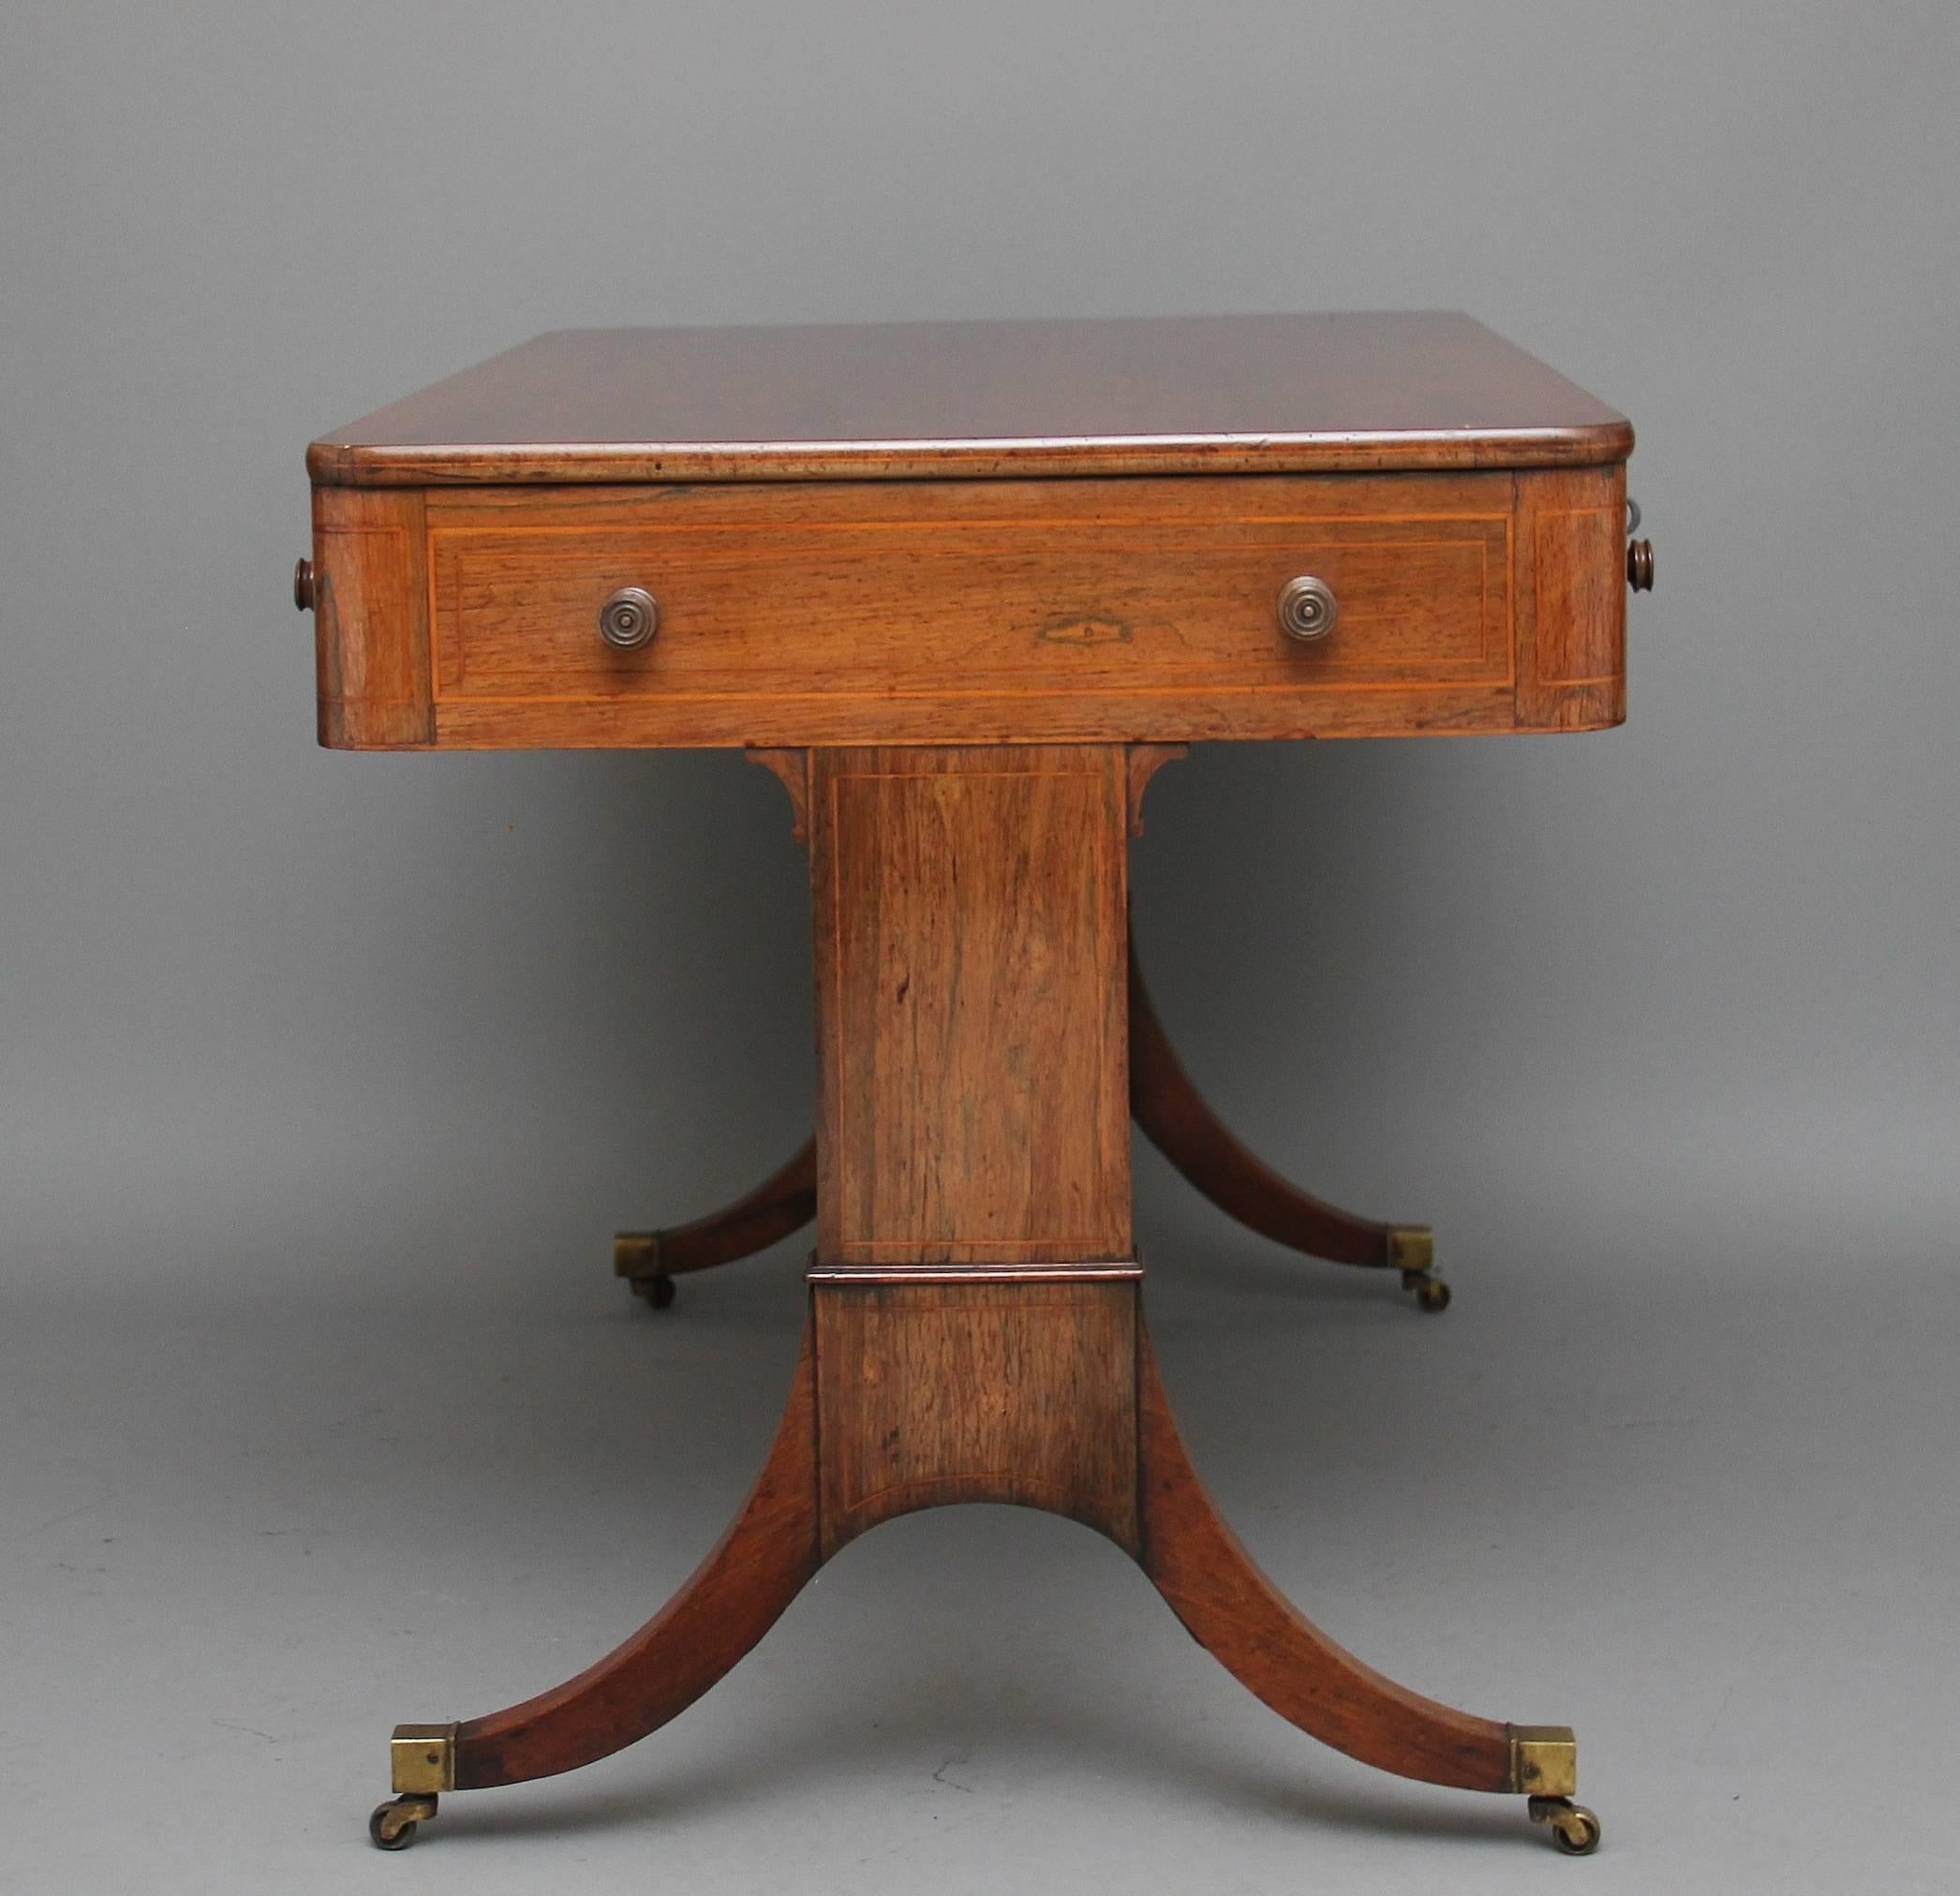 19th century rosewood inlaid writing or sofa table, the rounded rectangular top above two mahogany lined drawers with original wooden turned knobs, the reverse the same but having dummy drawers, the sides of the table decorated also with original